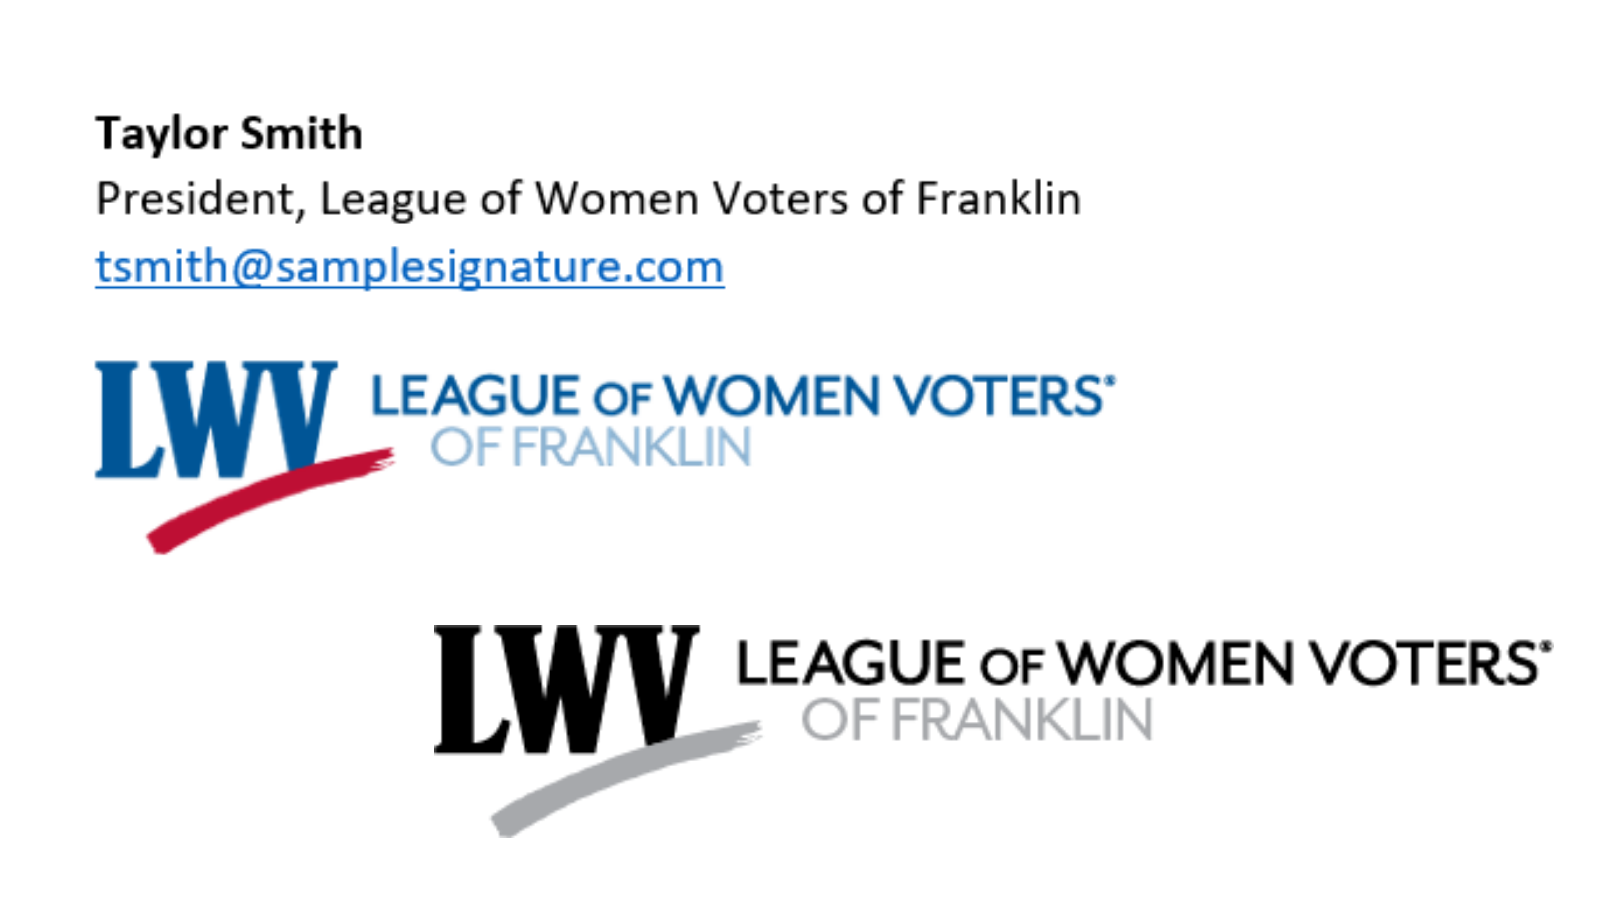 Example of LWV state and local logos. Top example is a sample email signature from "Taylor Smith" using a LWV red and blue logo. "League of Women Voters of Franklin" is in text. The bottom right logo is a black and white LWV logo with the same phrase in text.